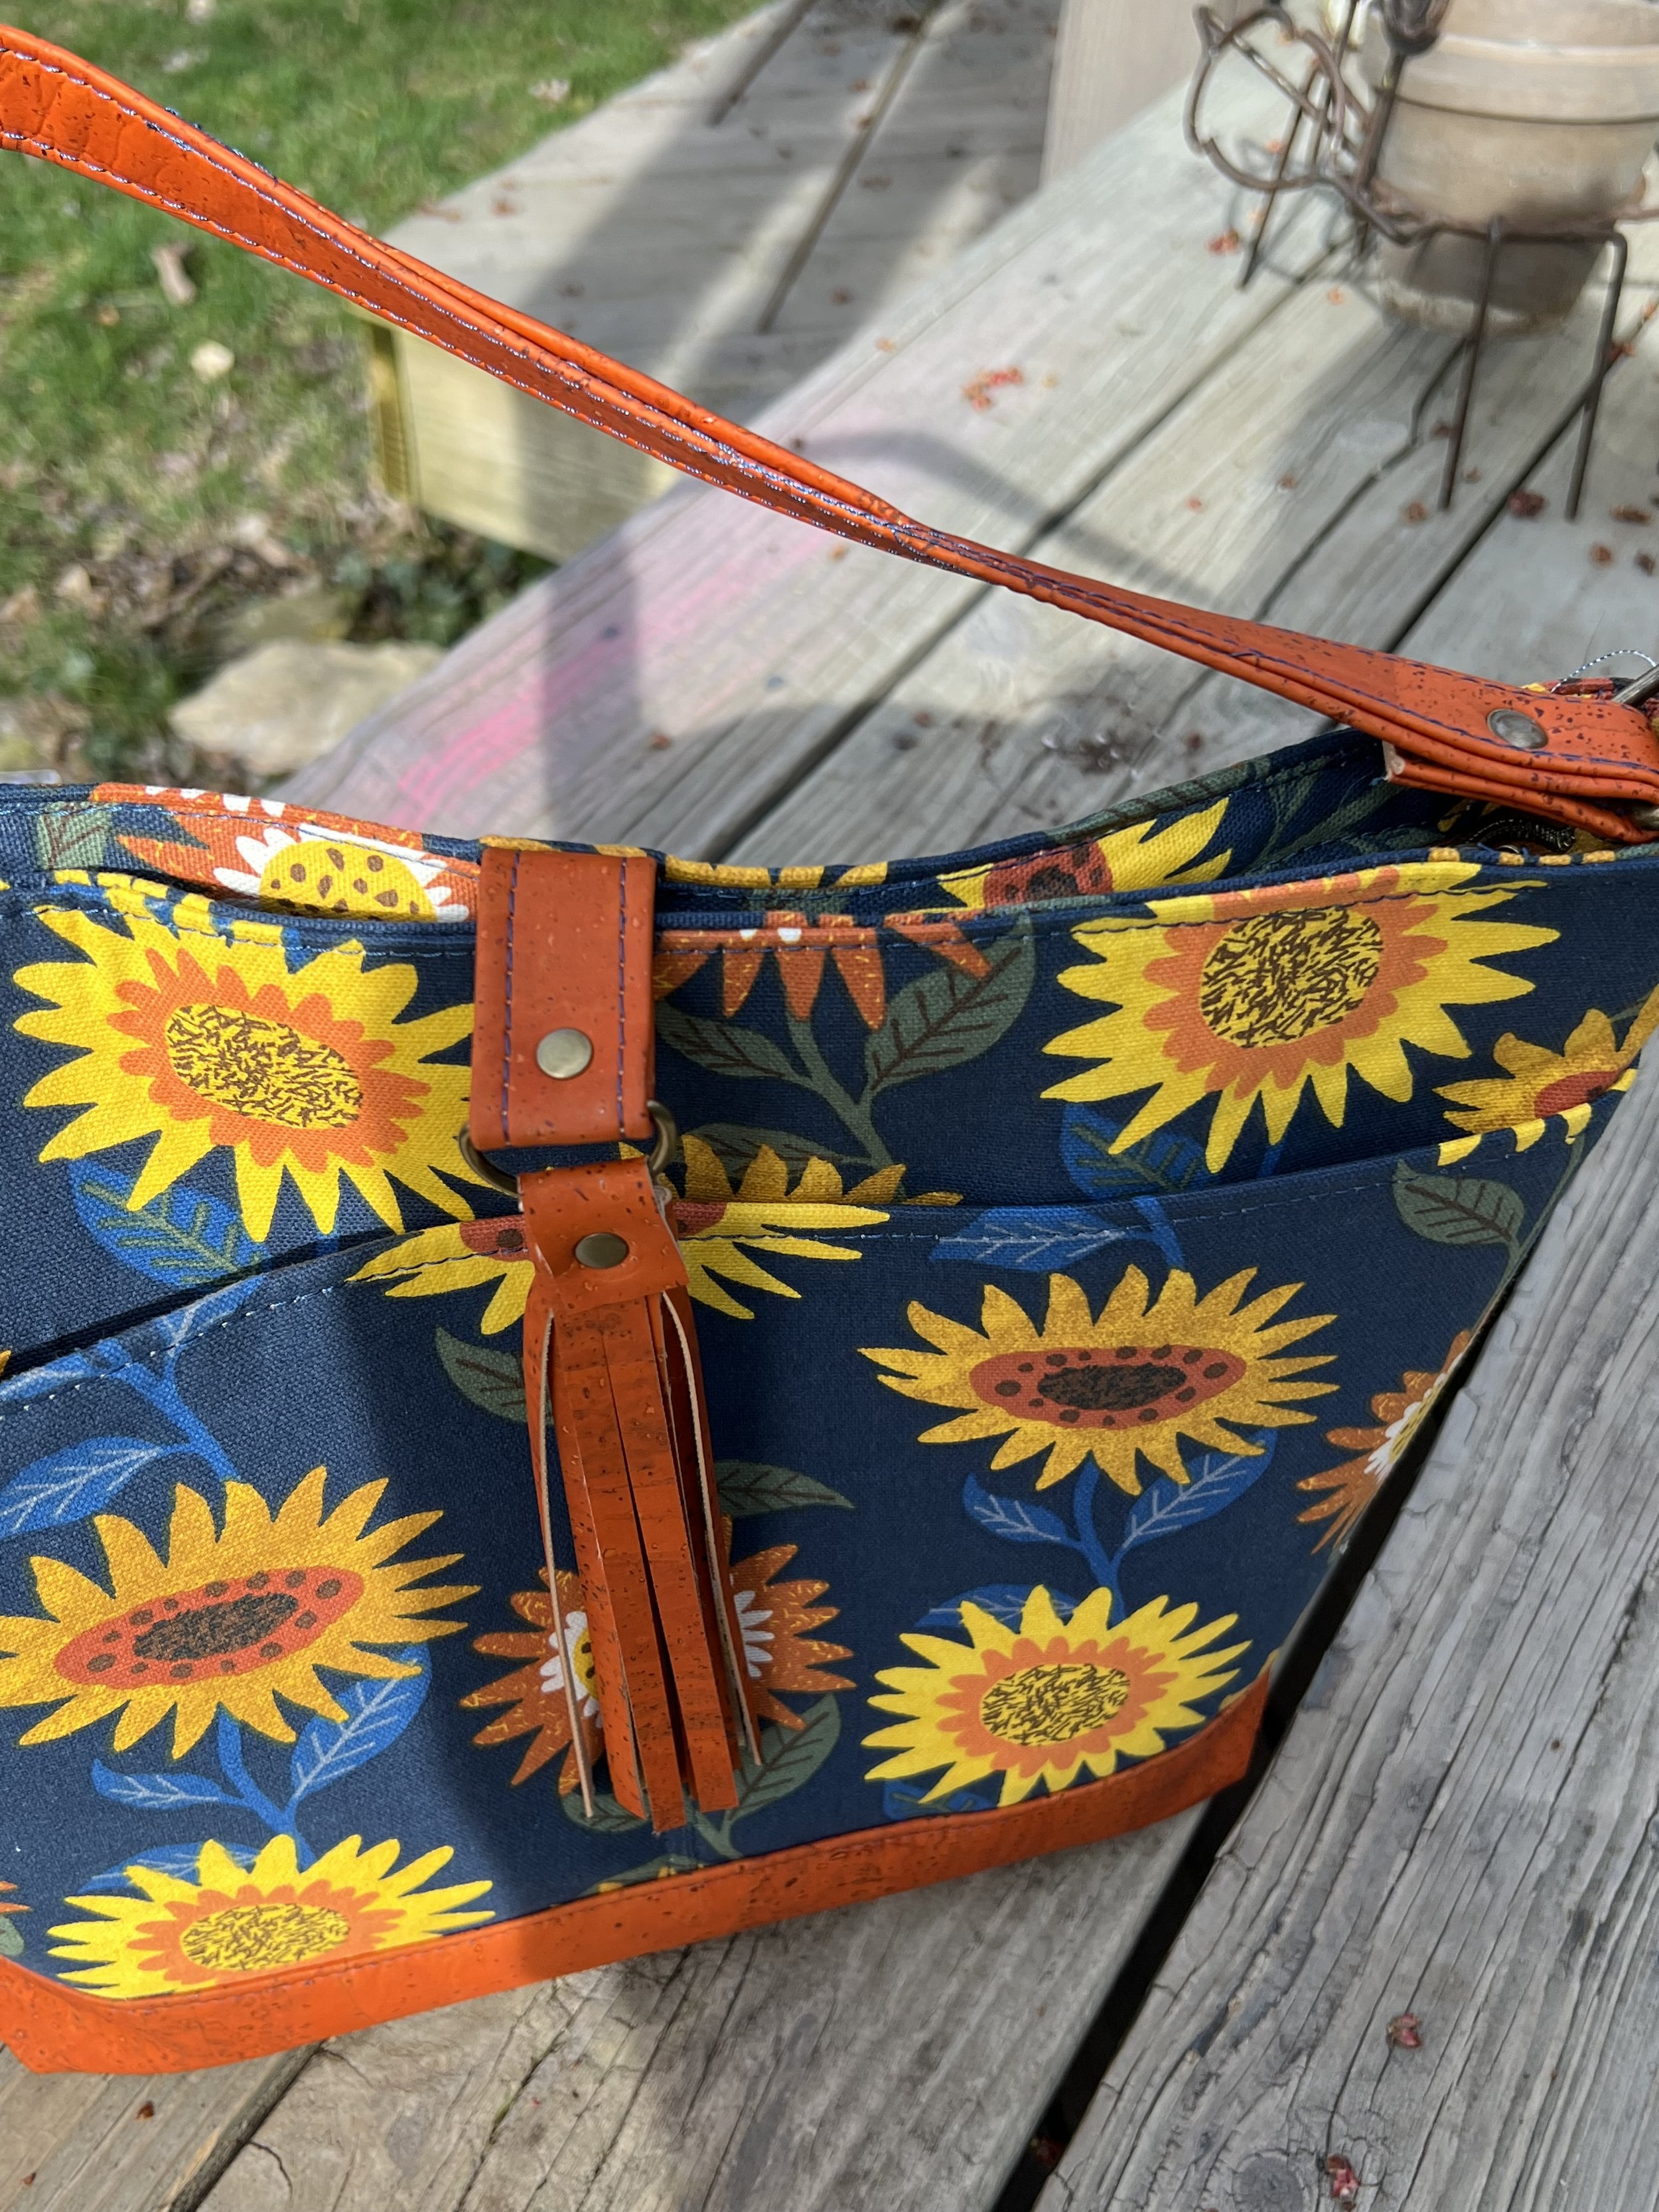 Sunflower Tote Bag, Flower Tote Bag, Tote Bag Canvas, Eco Friendly Bag,aesthetic  Tote,butterfly Bag, Floral Tote Bag,plant Lover, Flower Bag - Etsy |  Butterfly bags, Floral tote bags, Tote bags handmade